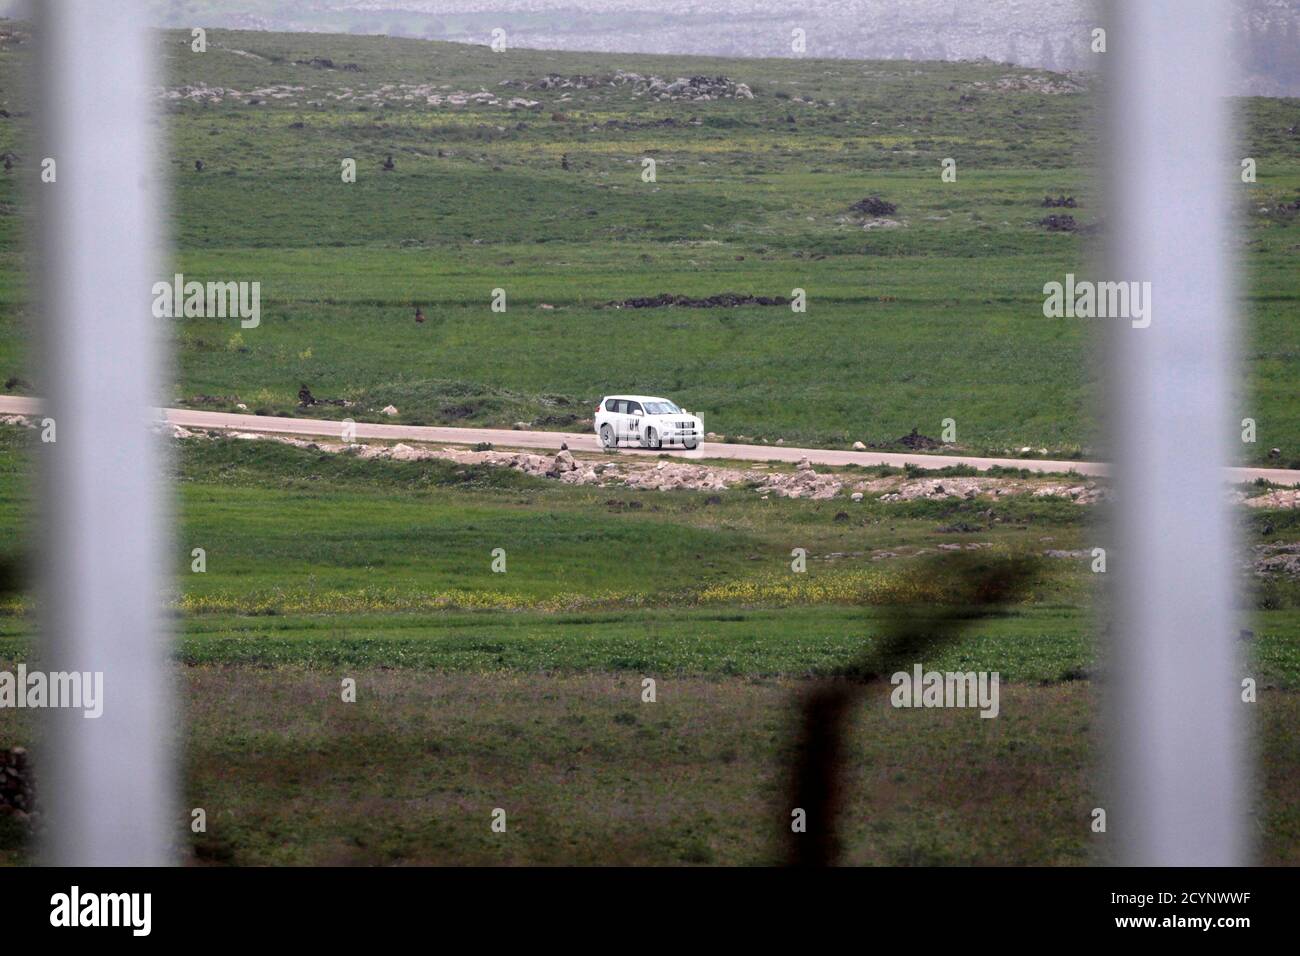 A United Nations vehicle drives near the Syrian village of Al Jamla, close to the ceasefire line between Israel and Syria, as seen from the Israeli occupied Golan Heights March 5, 2013. Syrian rebels have seized a convoy of U.N. peacekeepers near the Golan Heights and say they will hold them captive until President Bashar al-Assad's forces pull back from a rebel-held village which has seen heavy recent fighting. Picture taken March 5, 2013. REUTERS/Baz Ratner (POLITICS CIVIL UNREST) Stock Photo